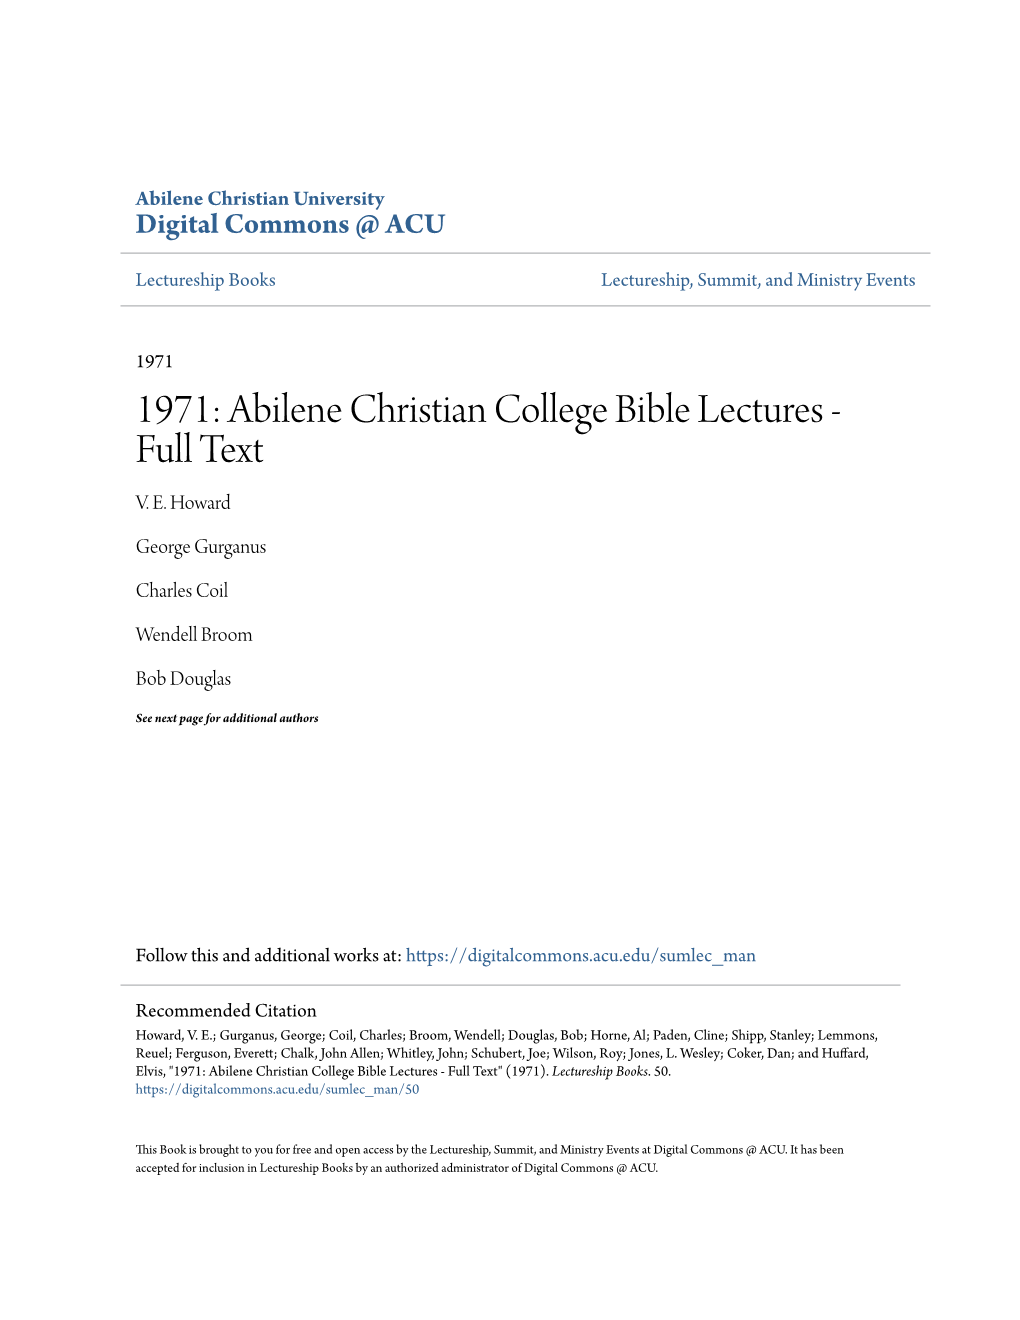 Abilene Christian College Bible Lectures - Full Text V